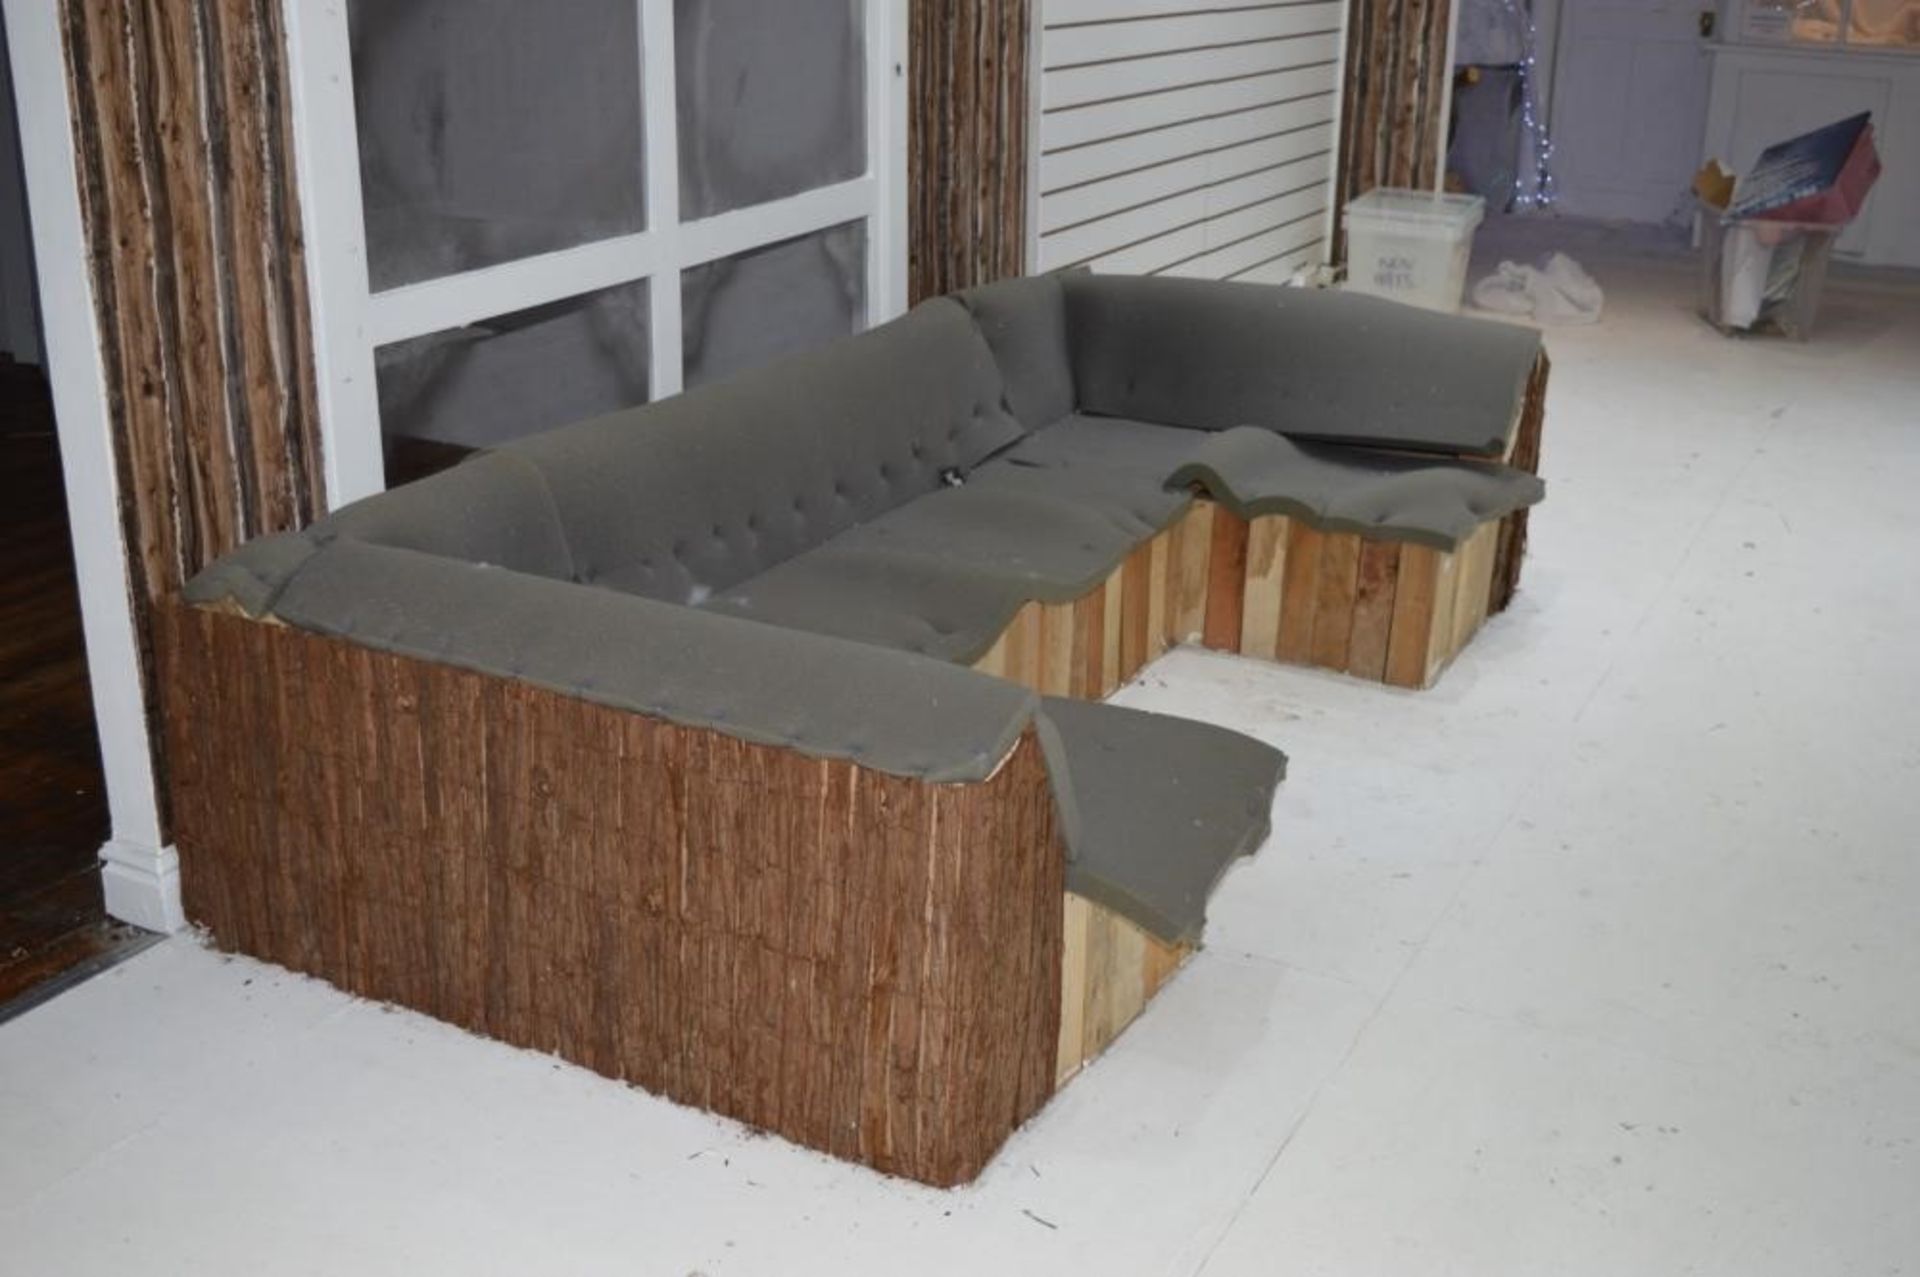 1 x Tiki Style Drinks Bar With Illuminated Rear Shelves and Unfinished Matching Seating Area - Ref B - Image 2 of 14